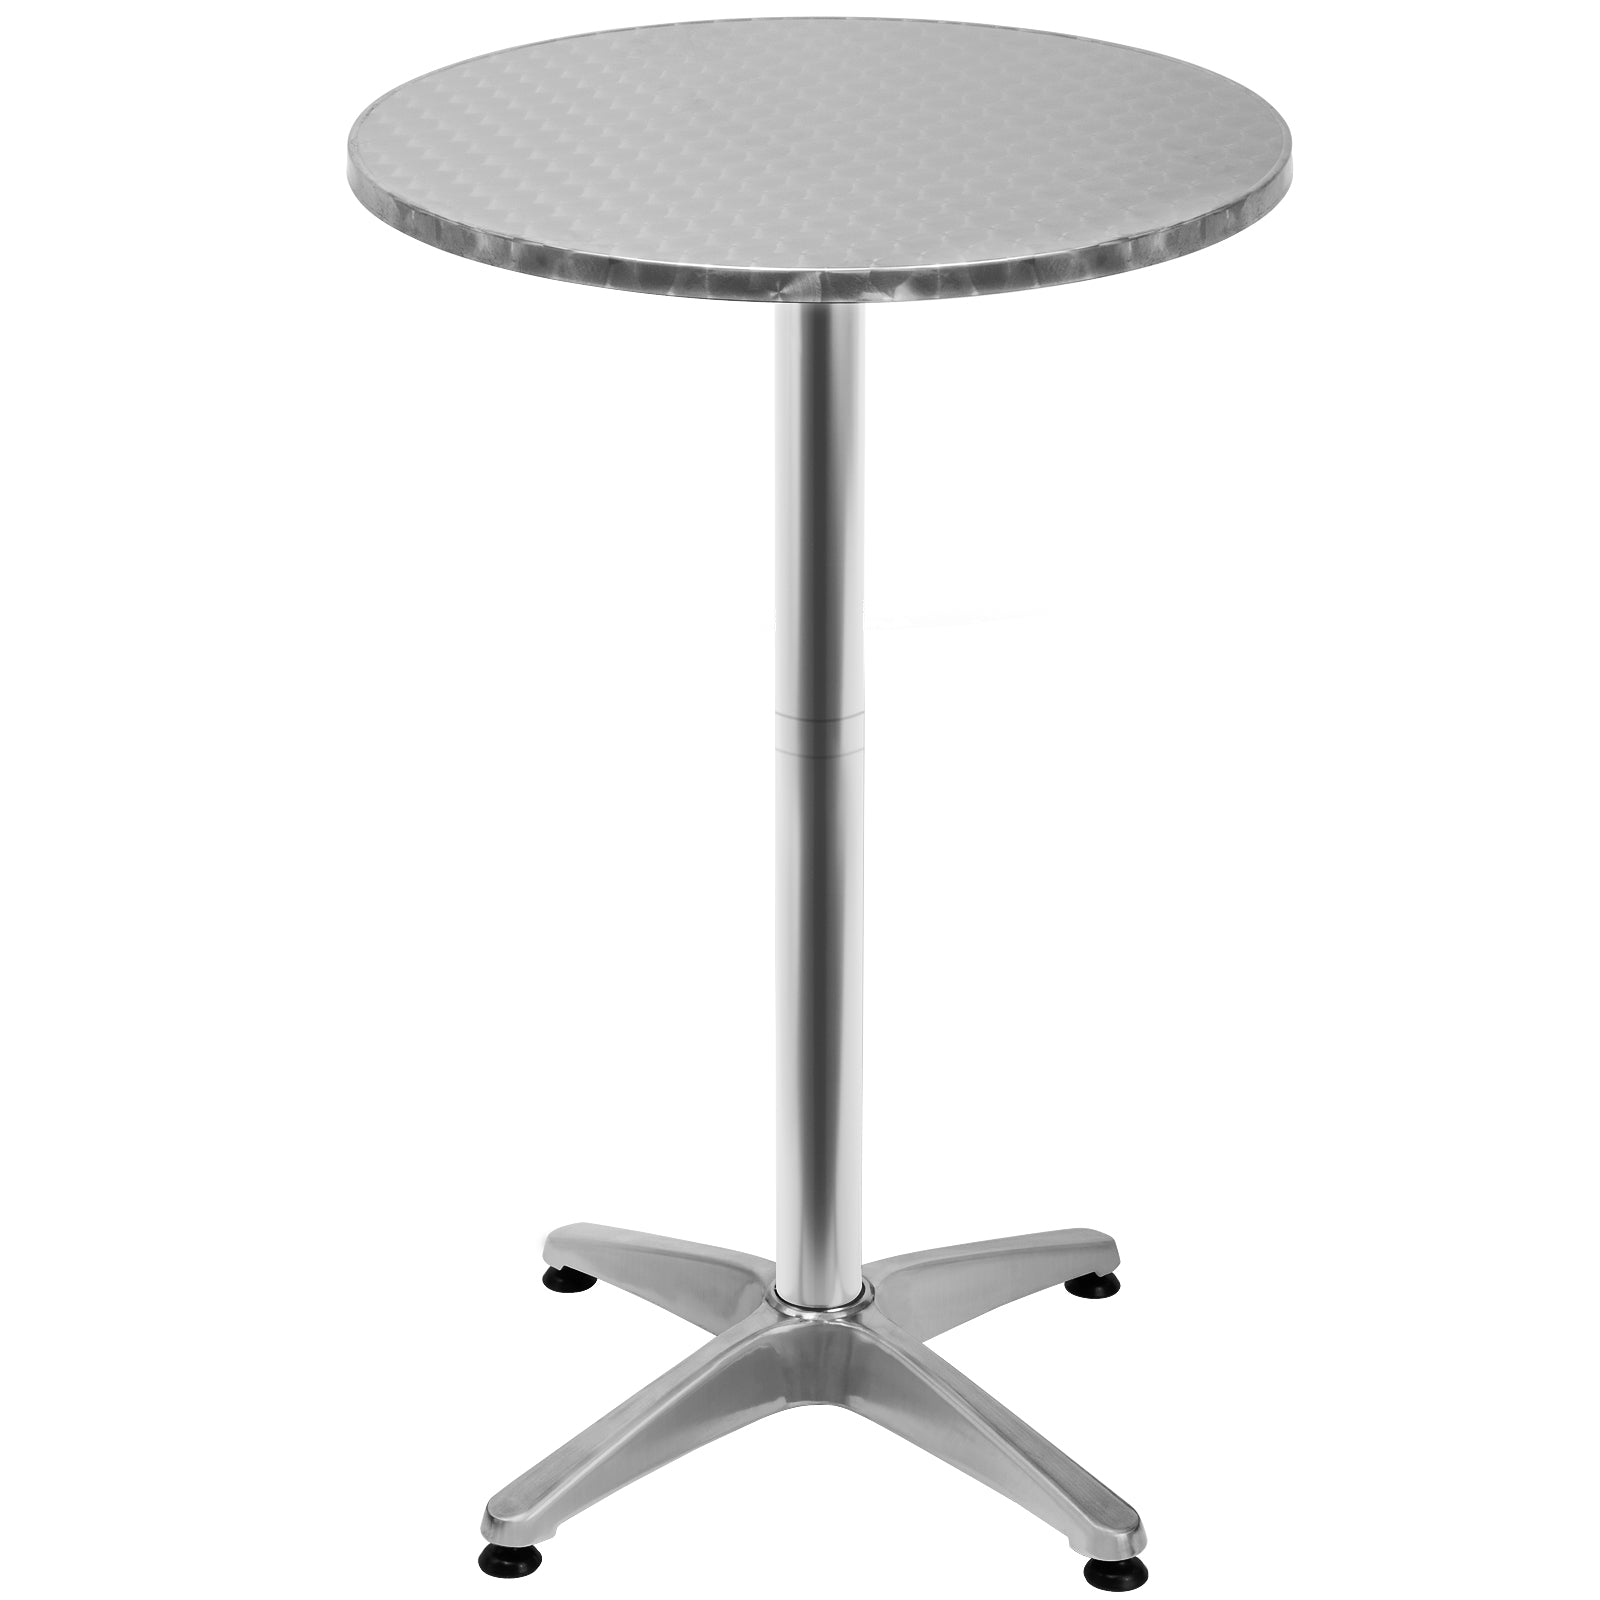 Nancy's Trumann Standing Table - Bistro Table - High Table - Standing Tables - Aluminum - Round - Ø 60 cm